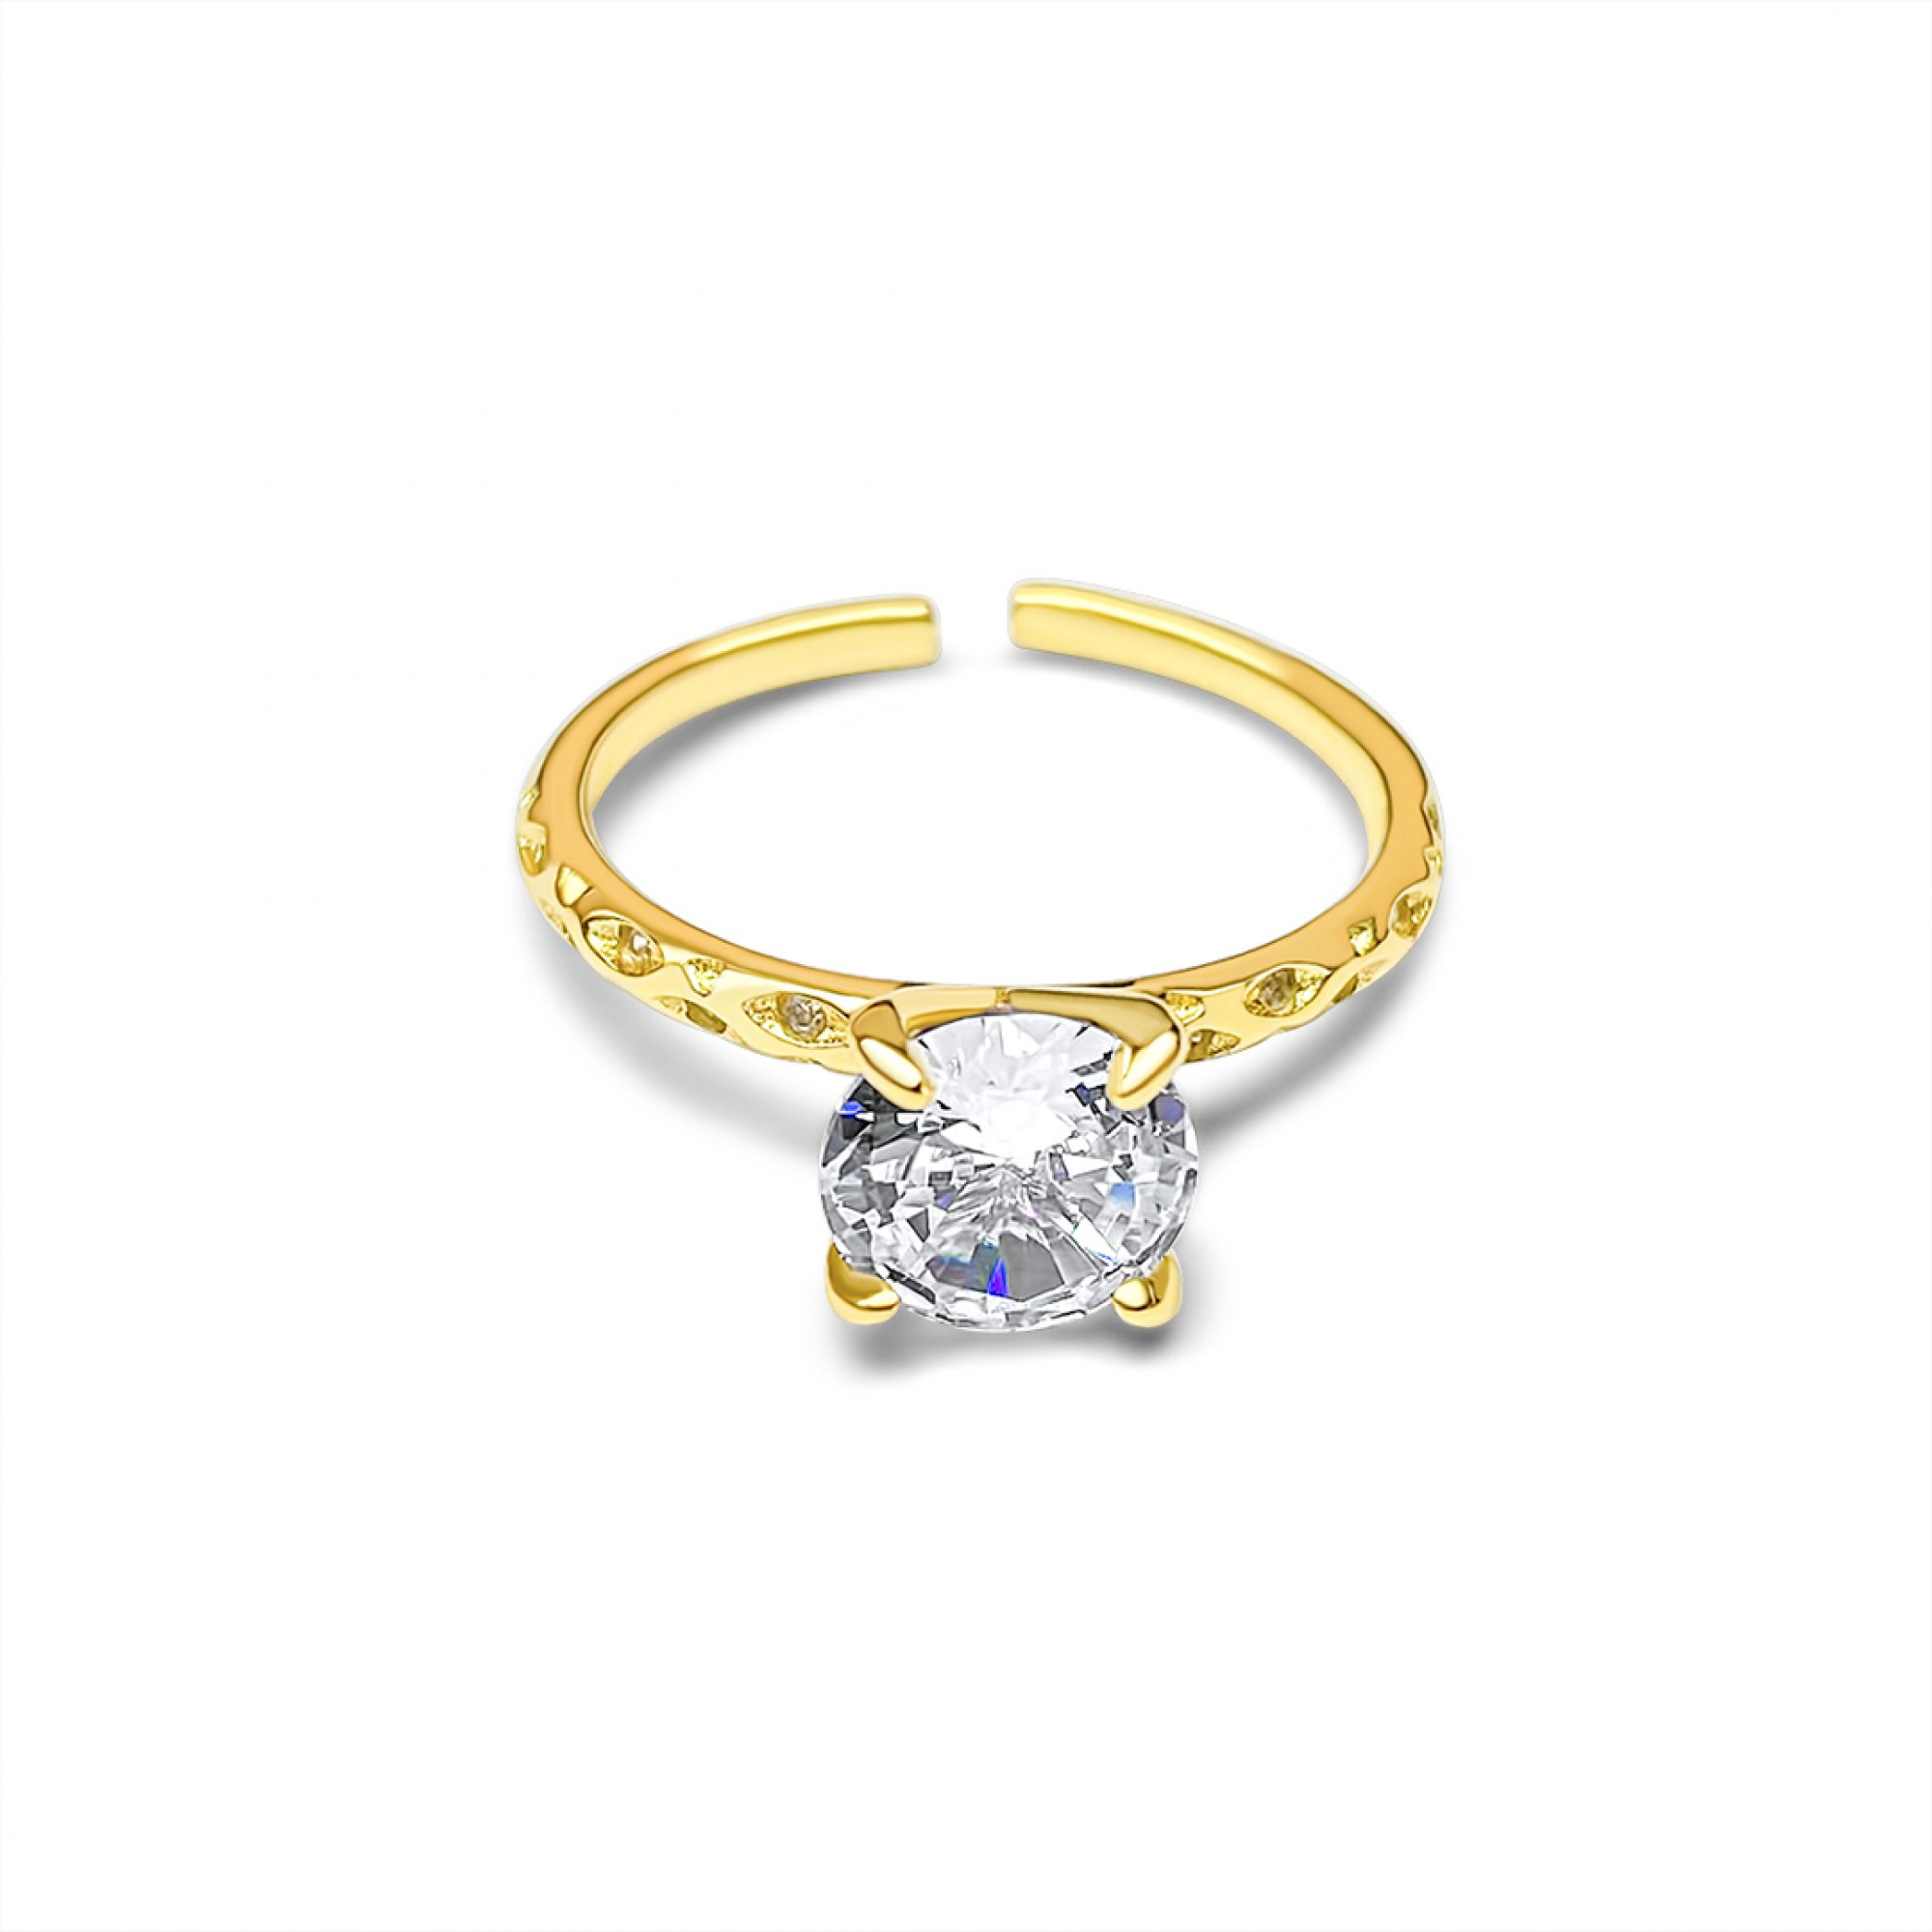 Gold plated ring with zircon stones